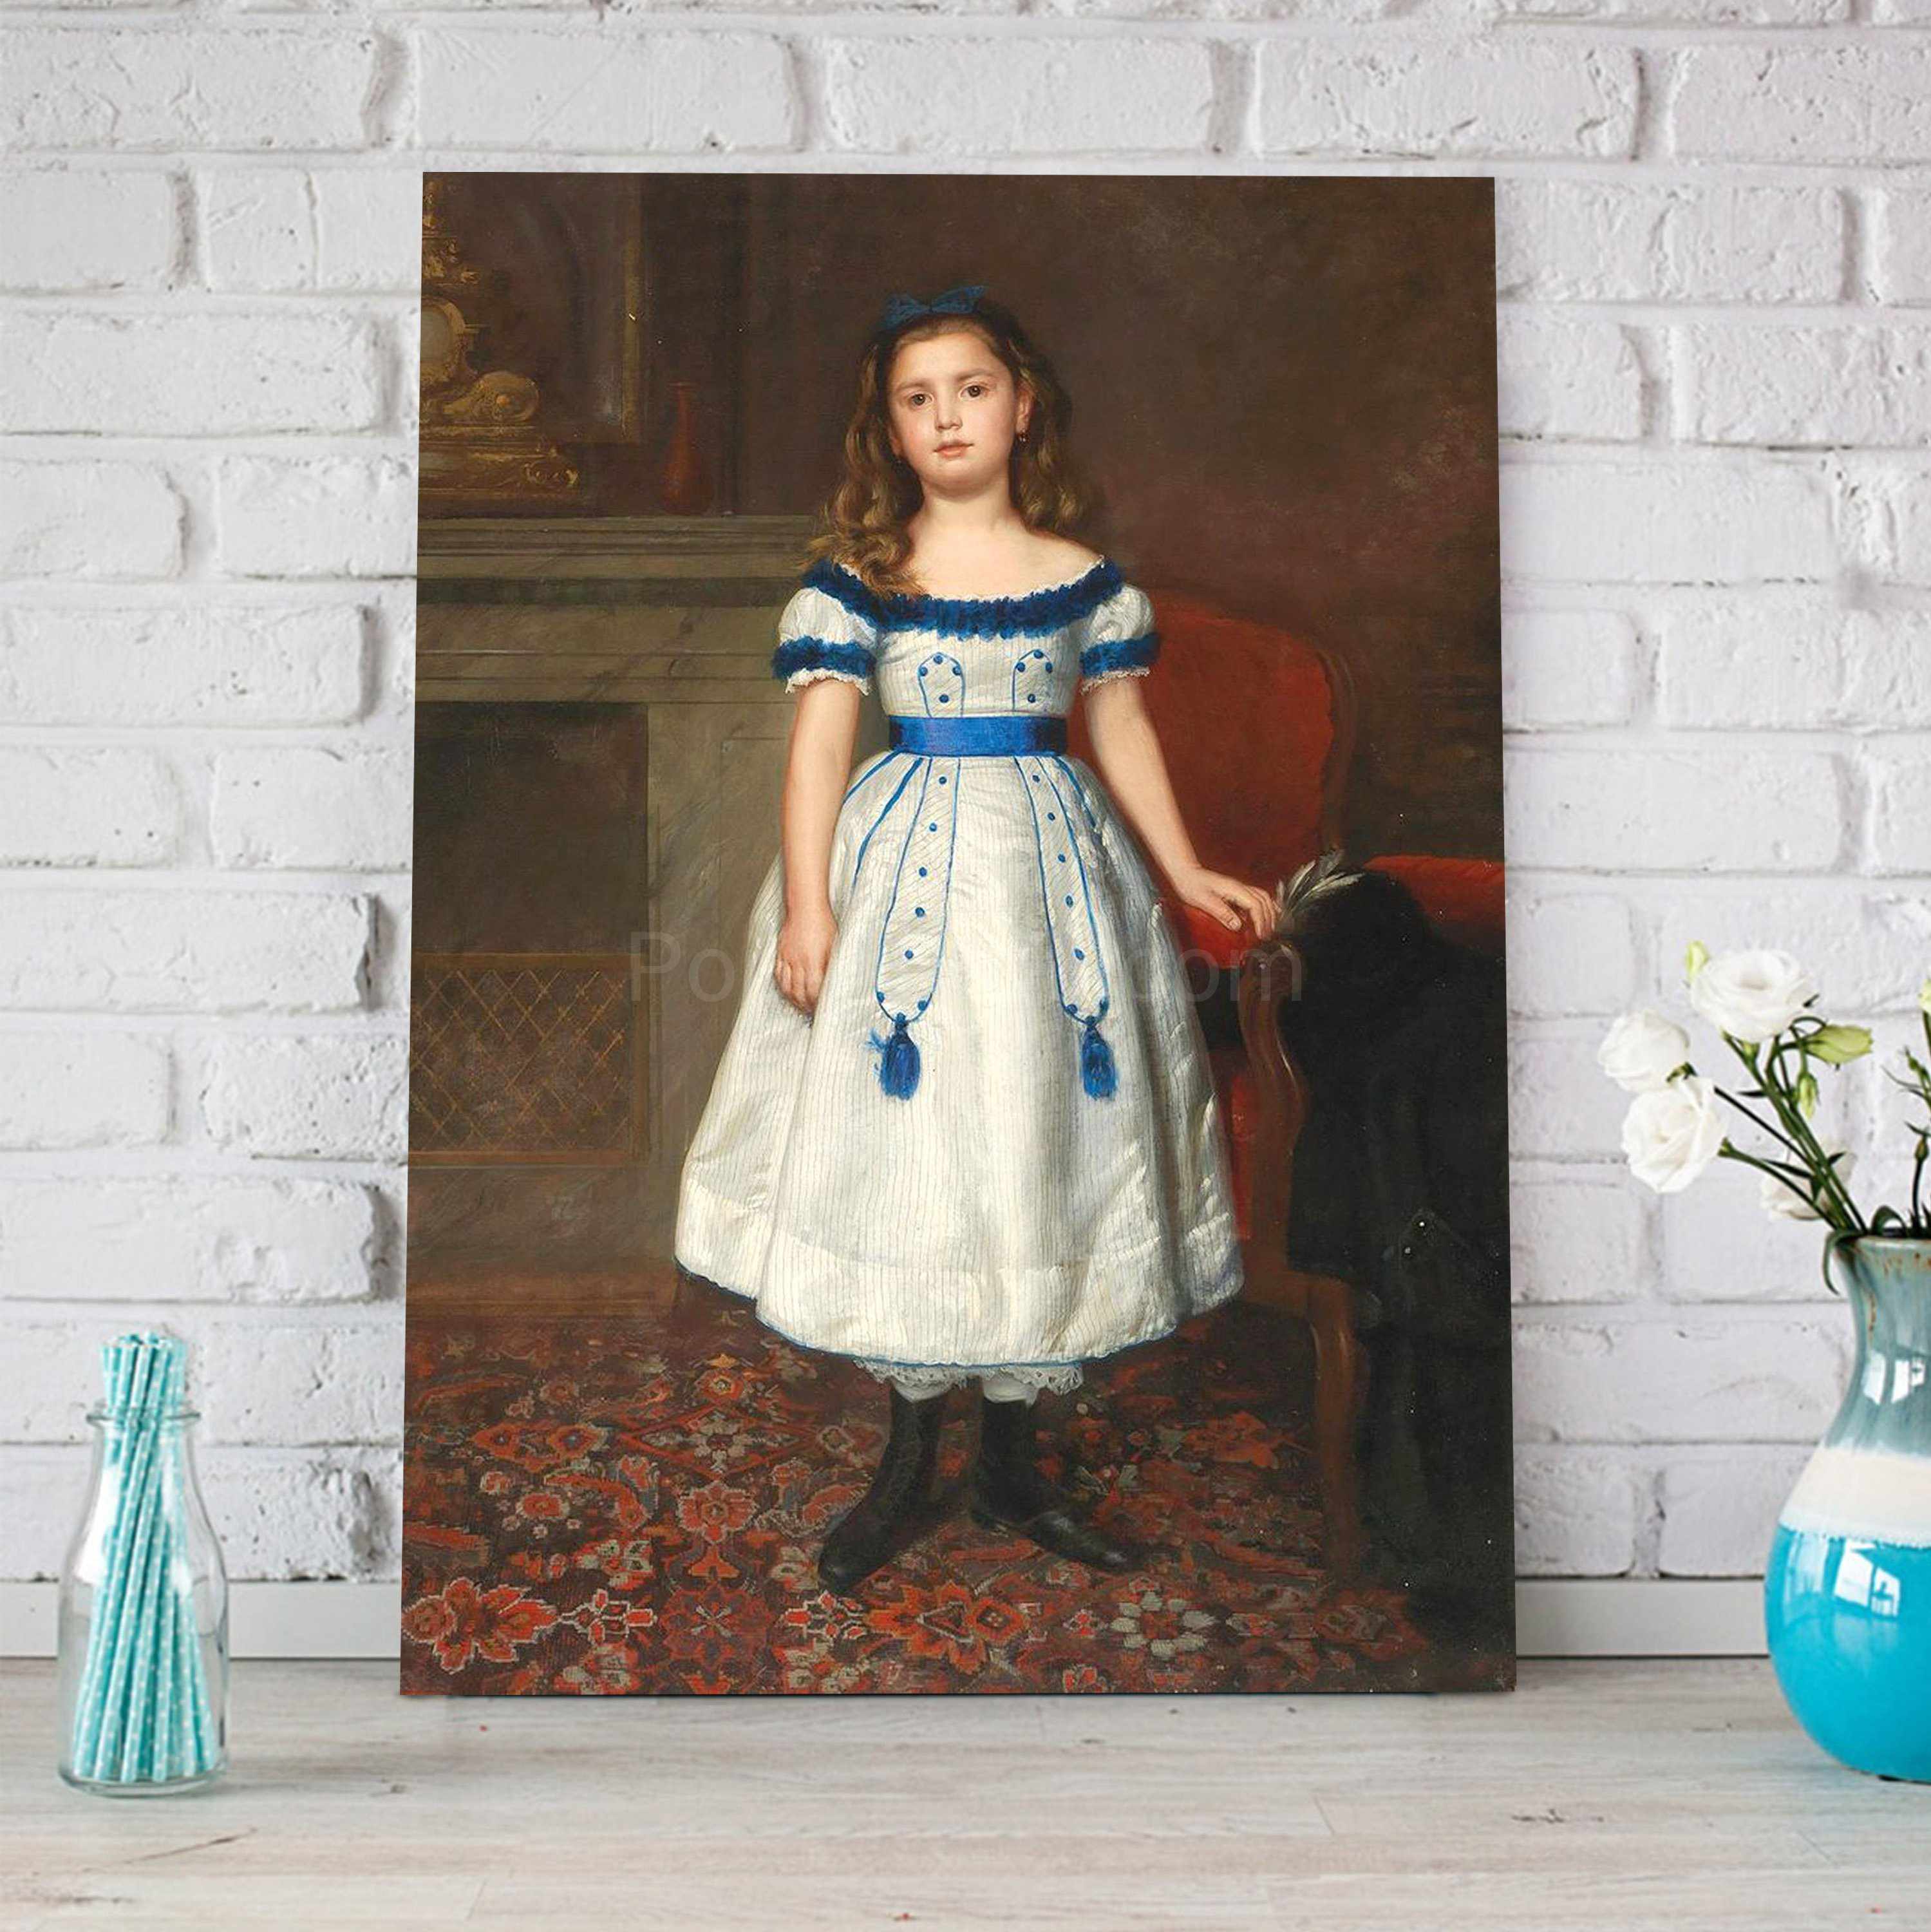 Portrait of a girl dressed in a blue regal dress stands on a wooden floor near a blue vase with roses